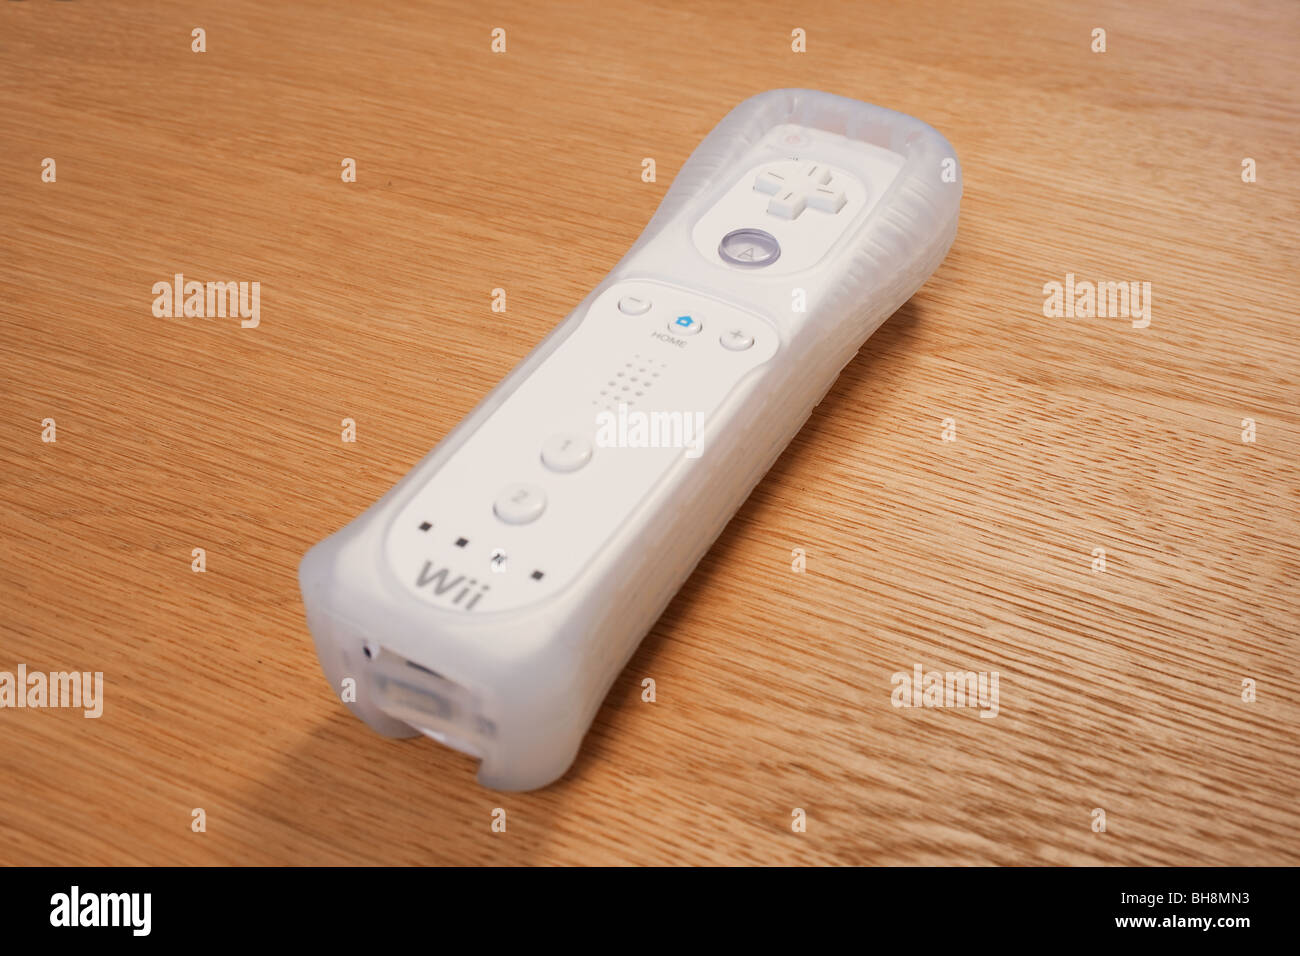 Nintendo Wii handset in rubber protector on wood surface Stock Photo - Alamy